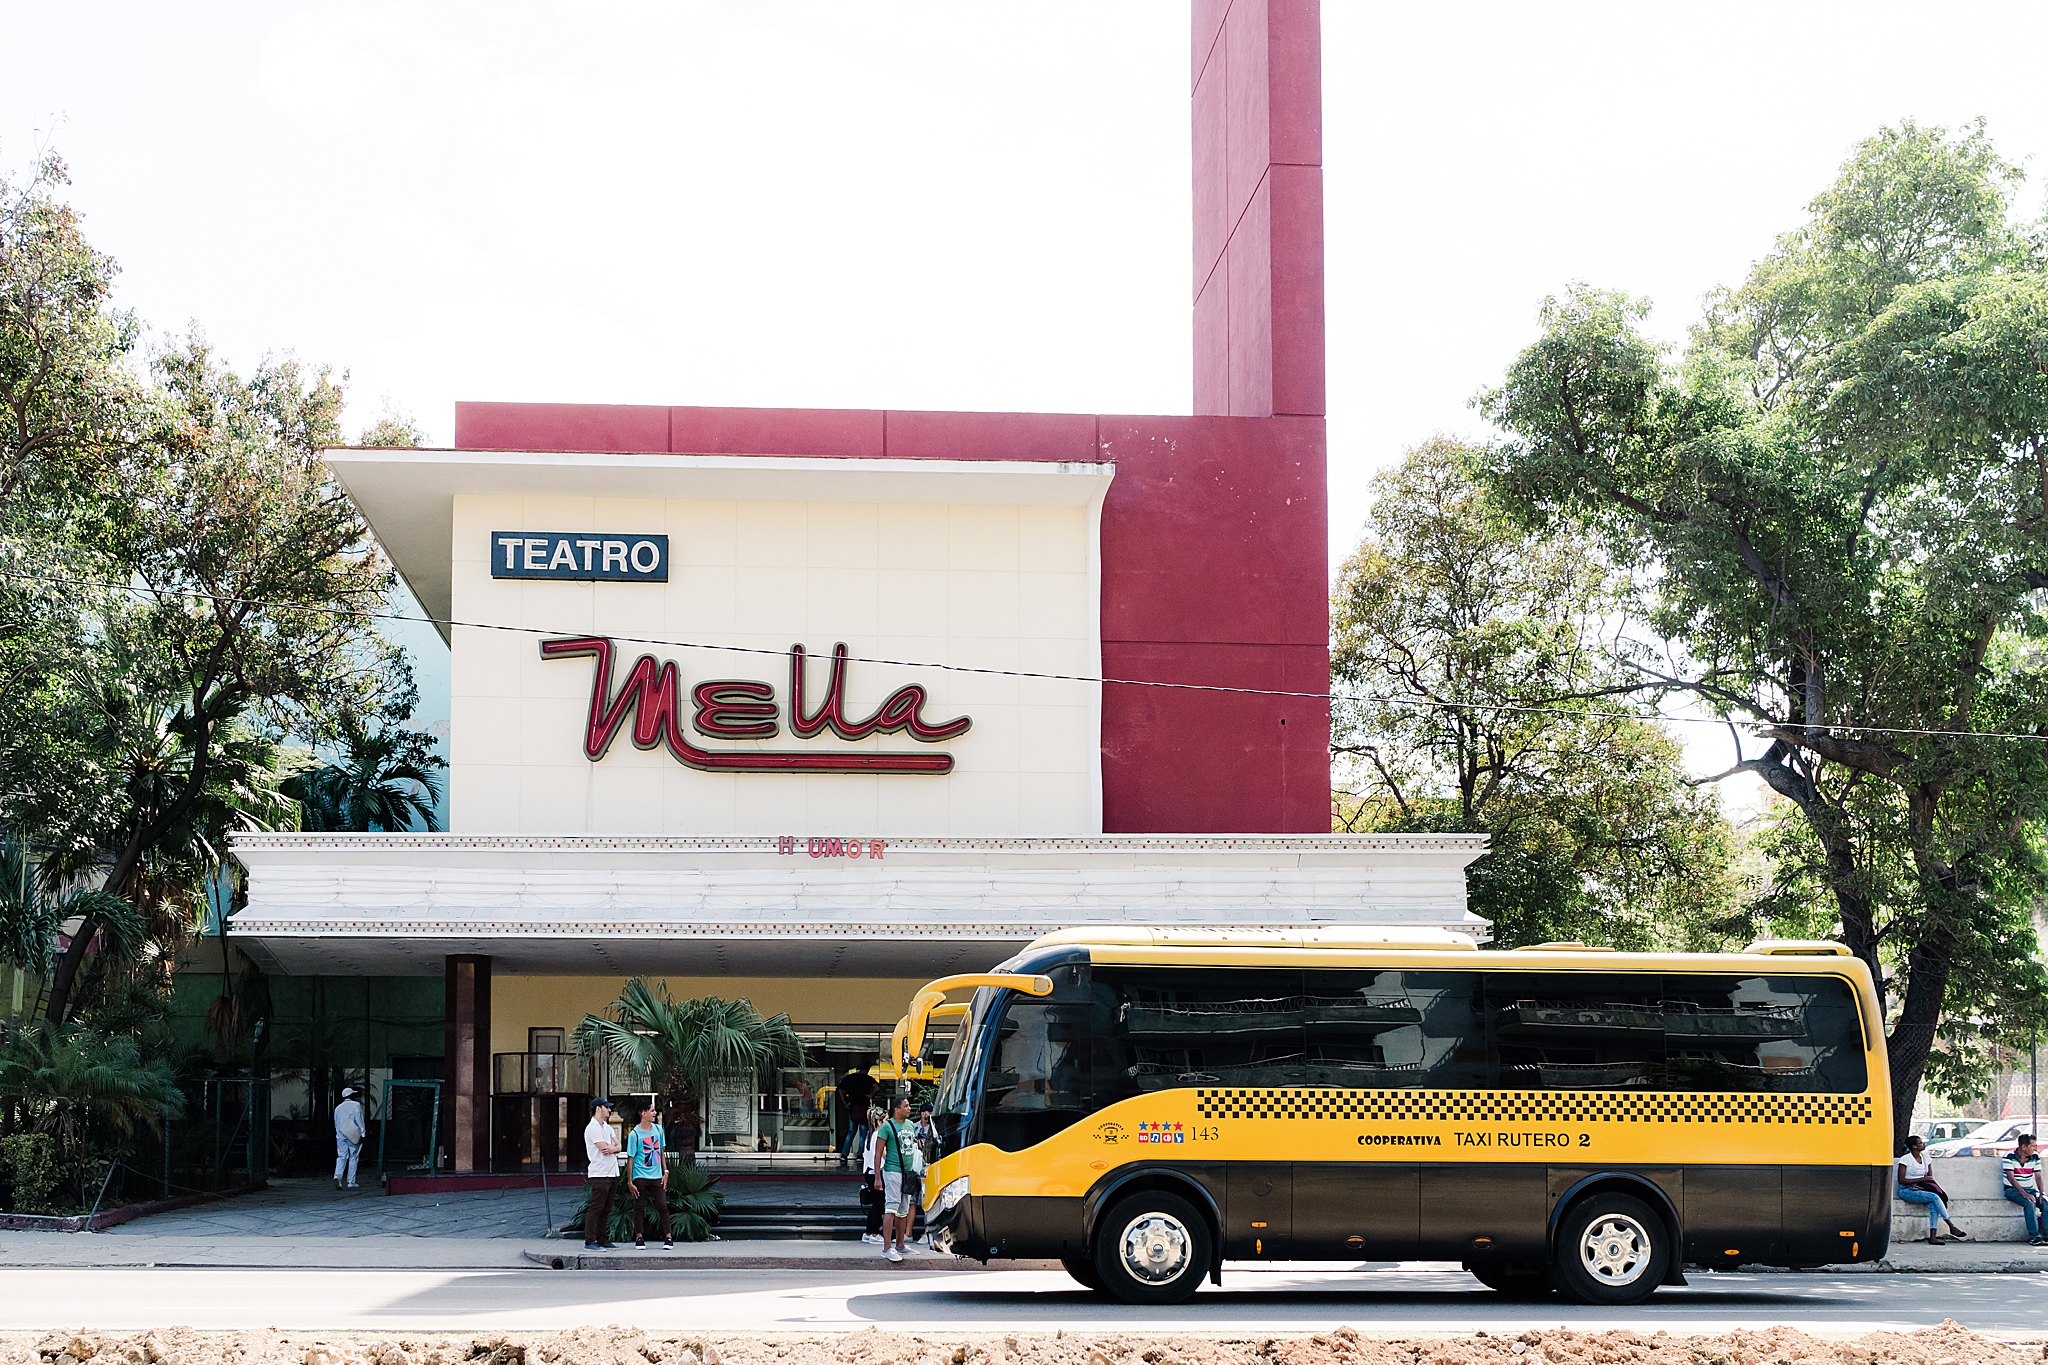  The mid-century Nella theater in Vedado, havana was right around the corner from our Airbnb.  